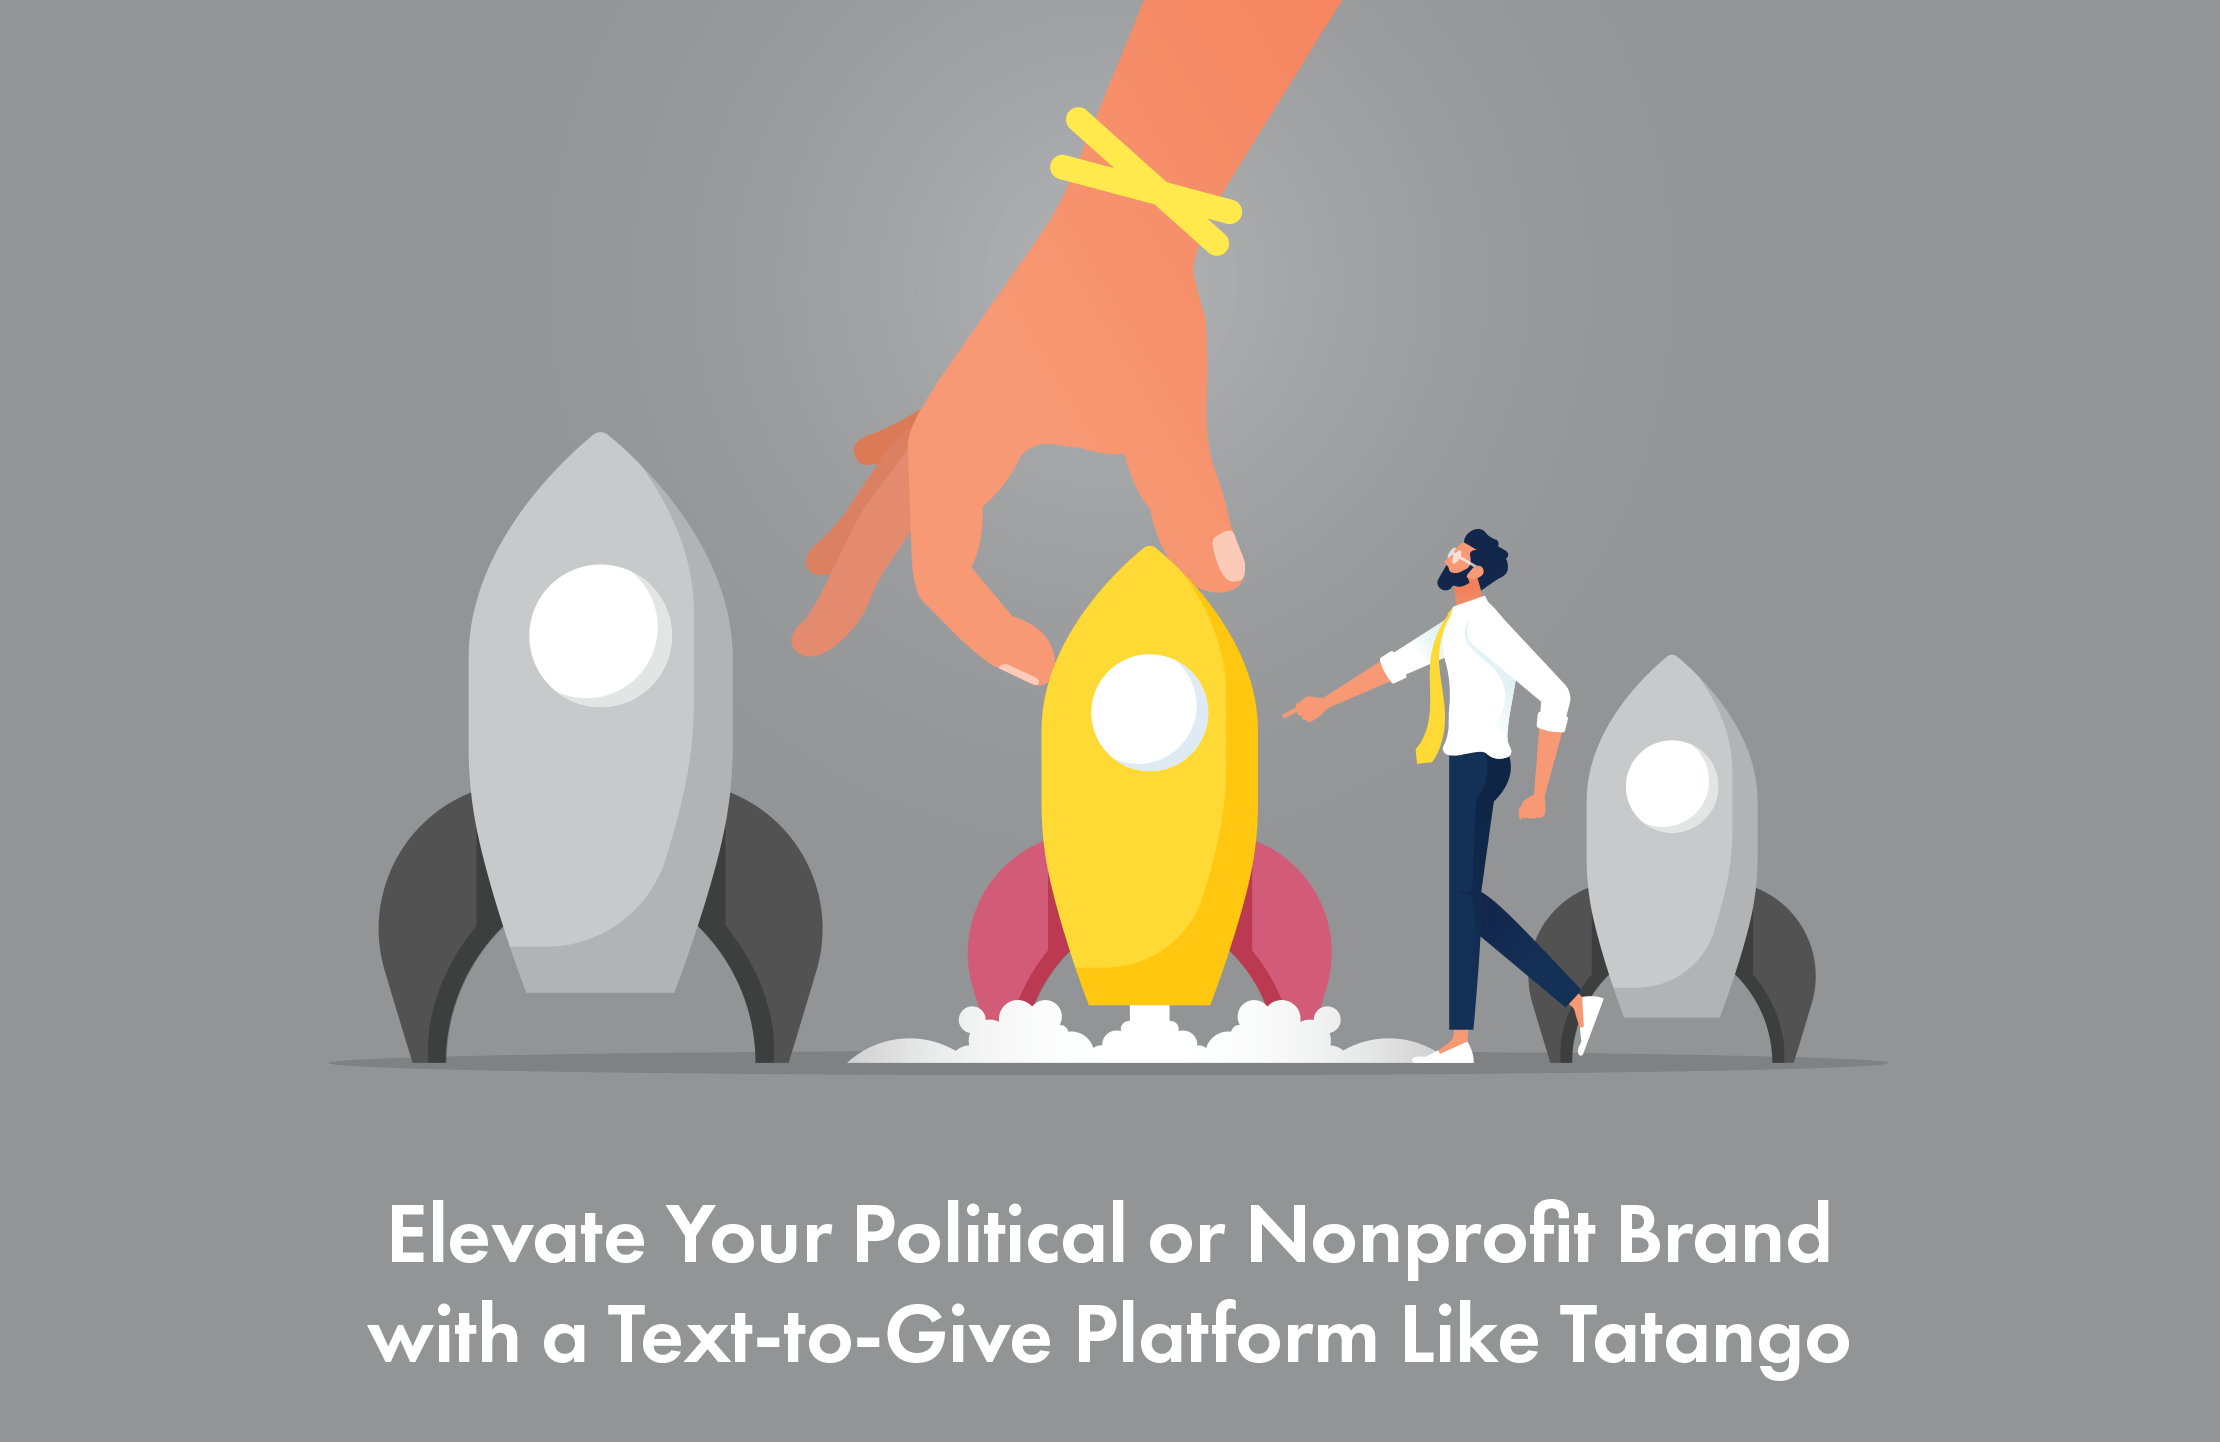 Elevate Your Political or Nonprofit Brand with a Text-to-Give Platform Like Tatango